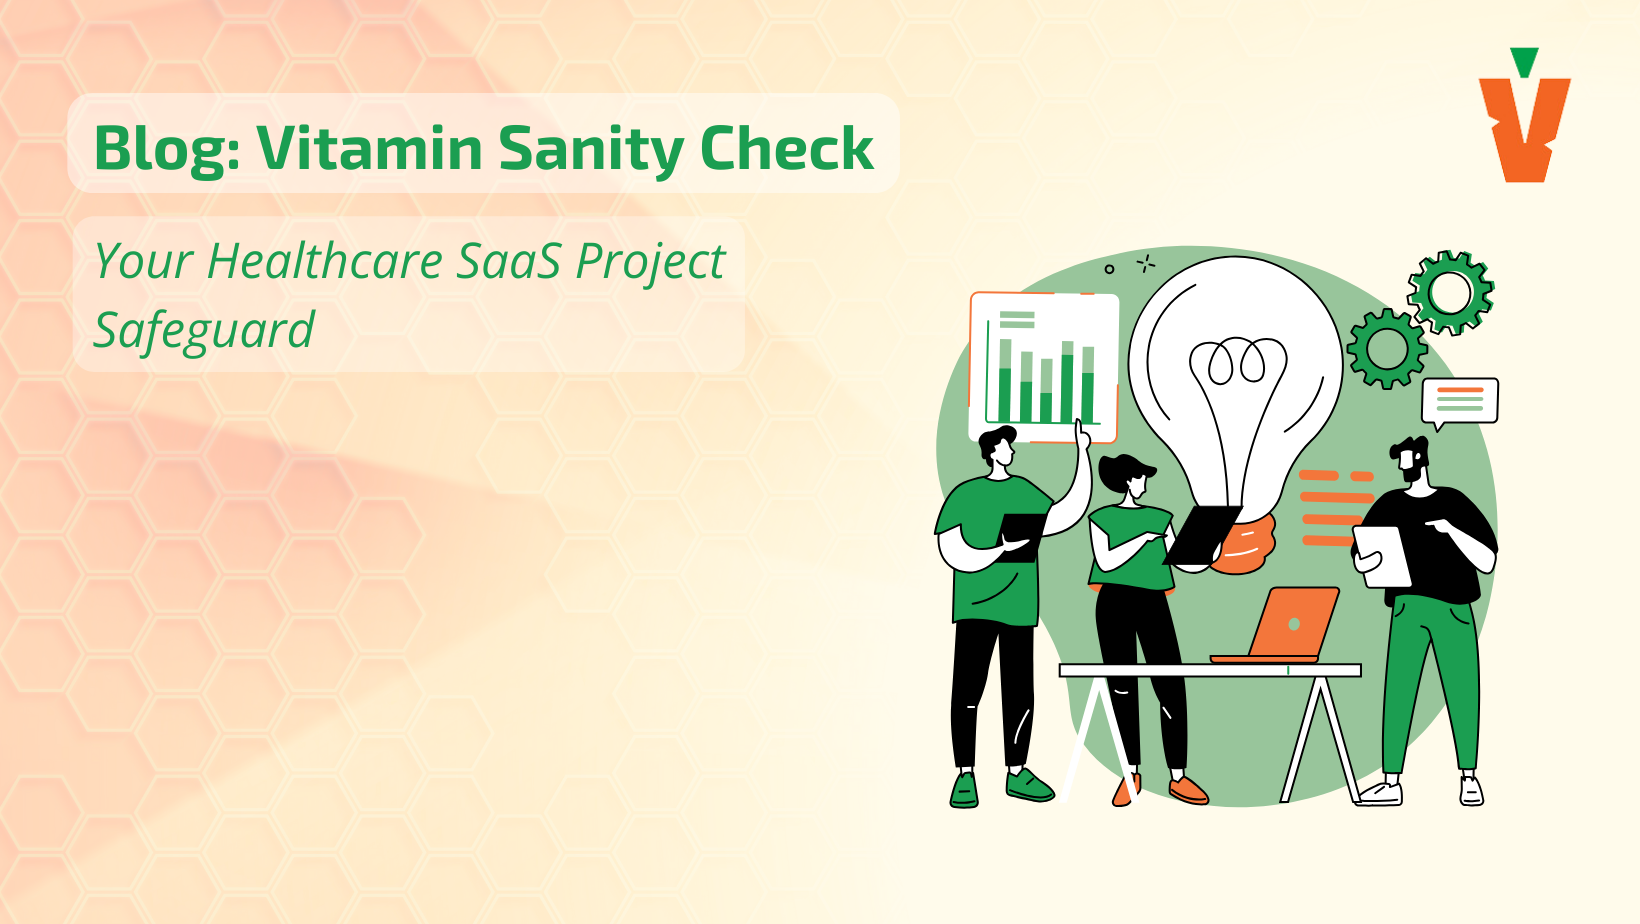 Vitamin Sanity Check: Your Healthcare SaaS Project Safeguard